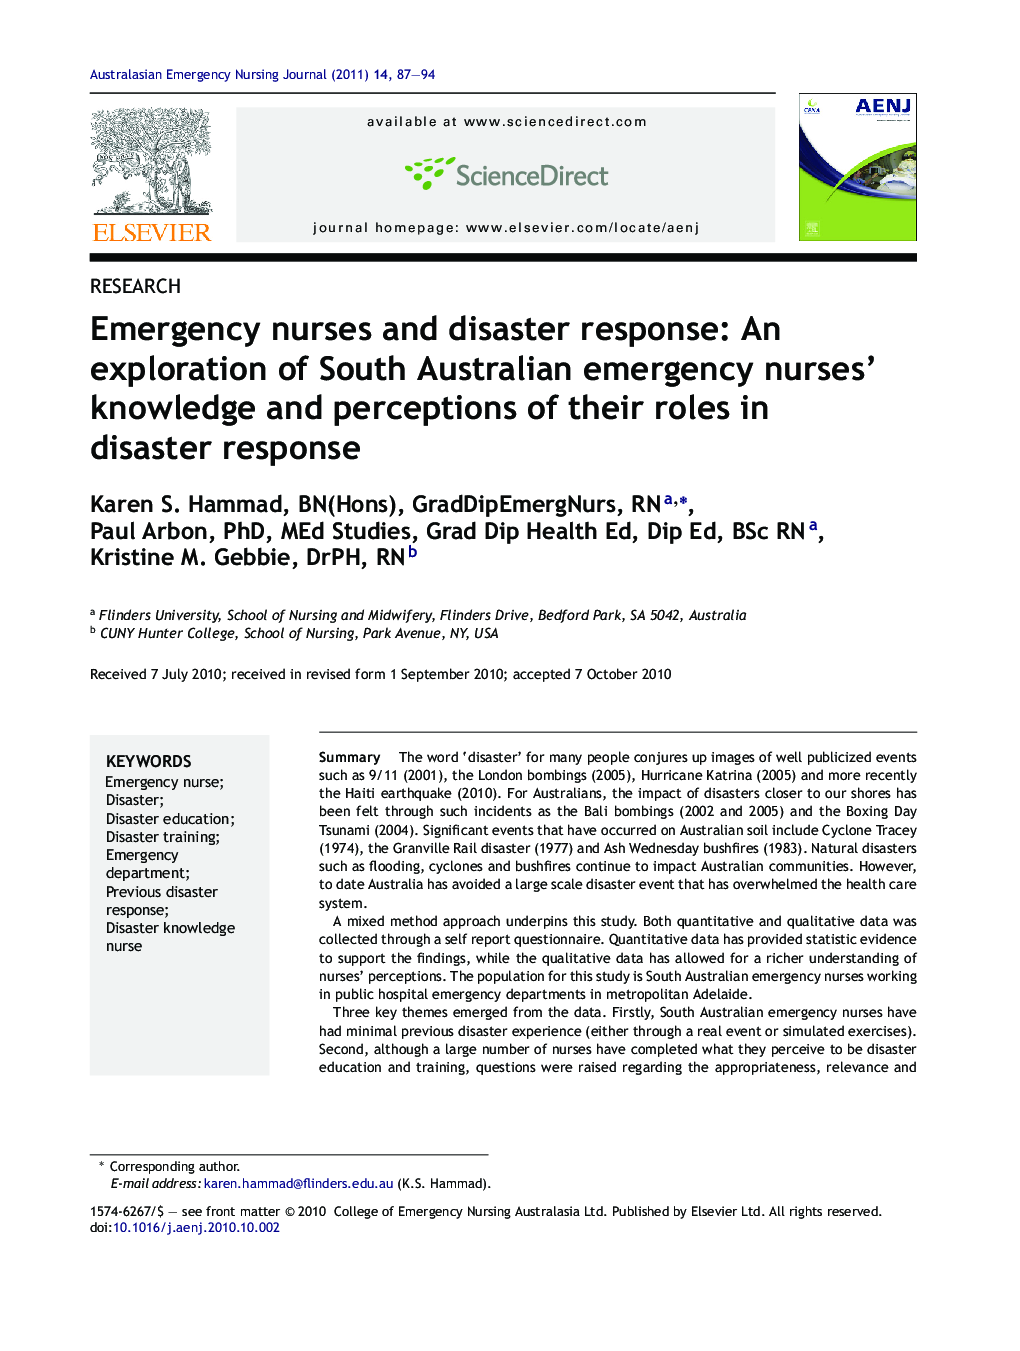 Emergency nurses and disaster response: An exploration of South Australian emergency nurses’ knowledge and perceptions of their roles in disaster response